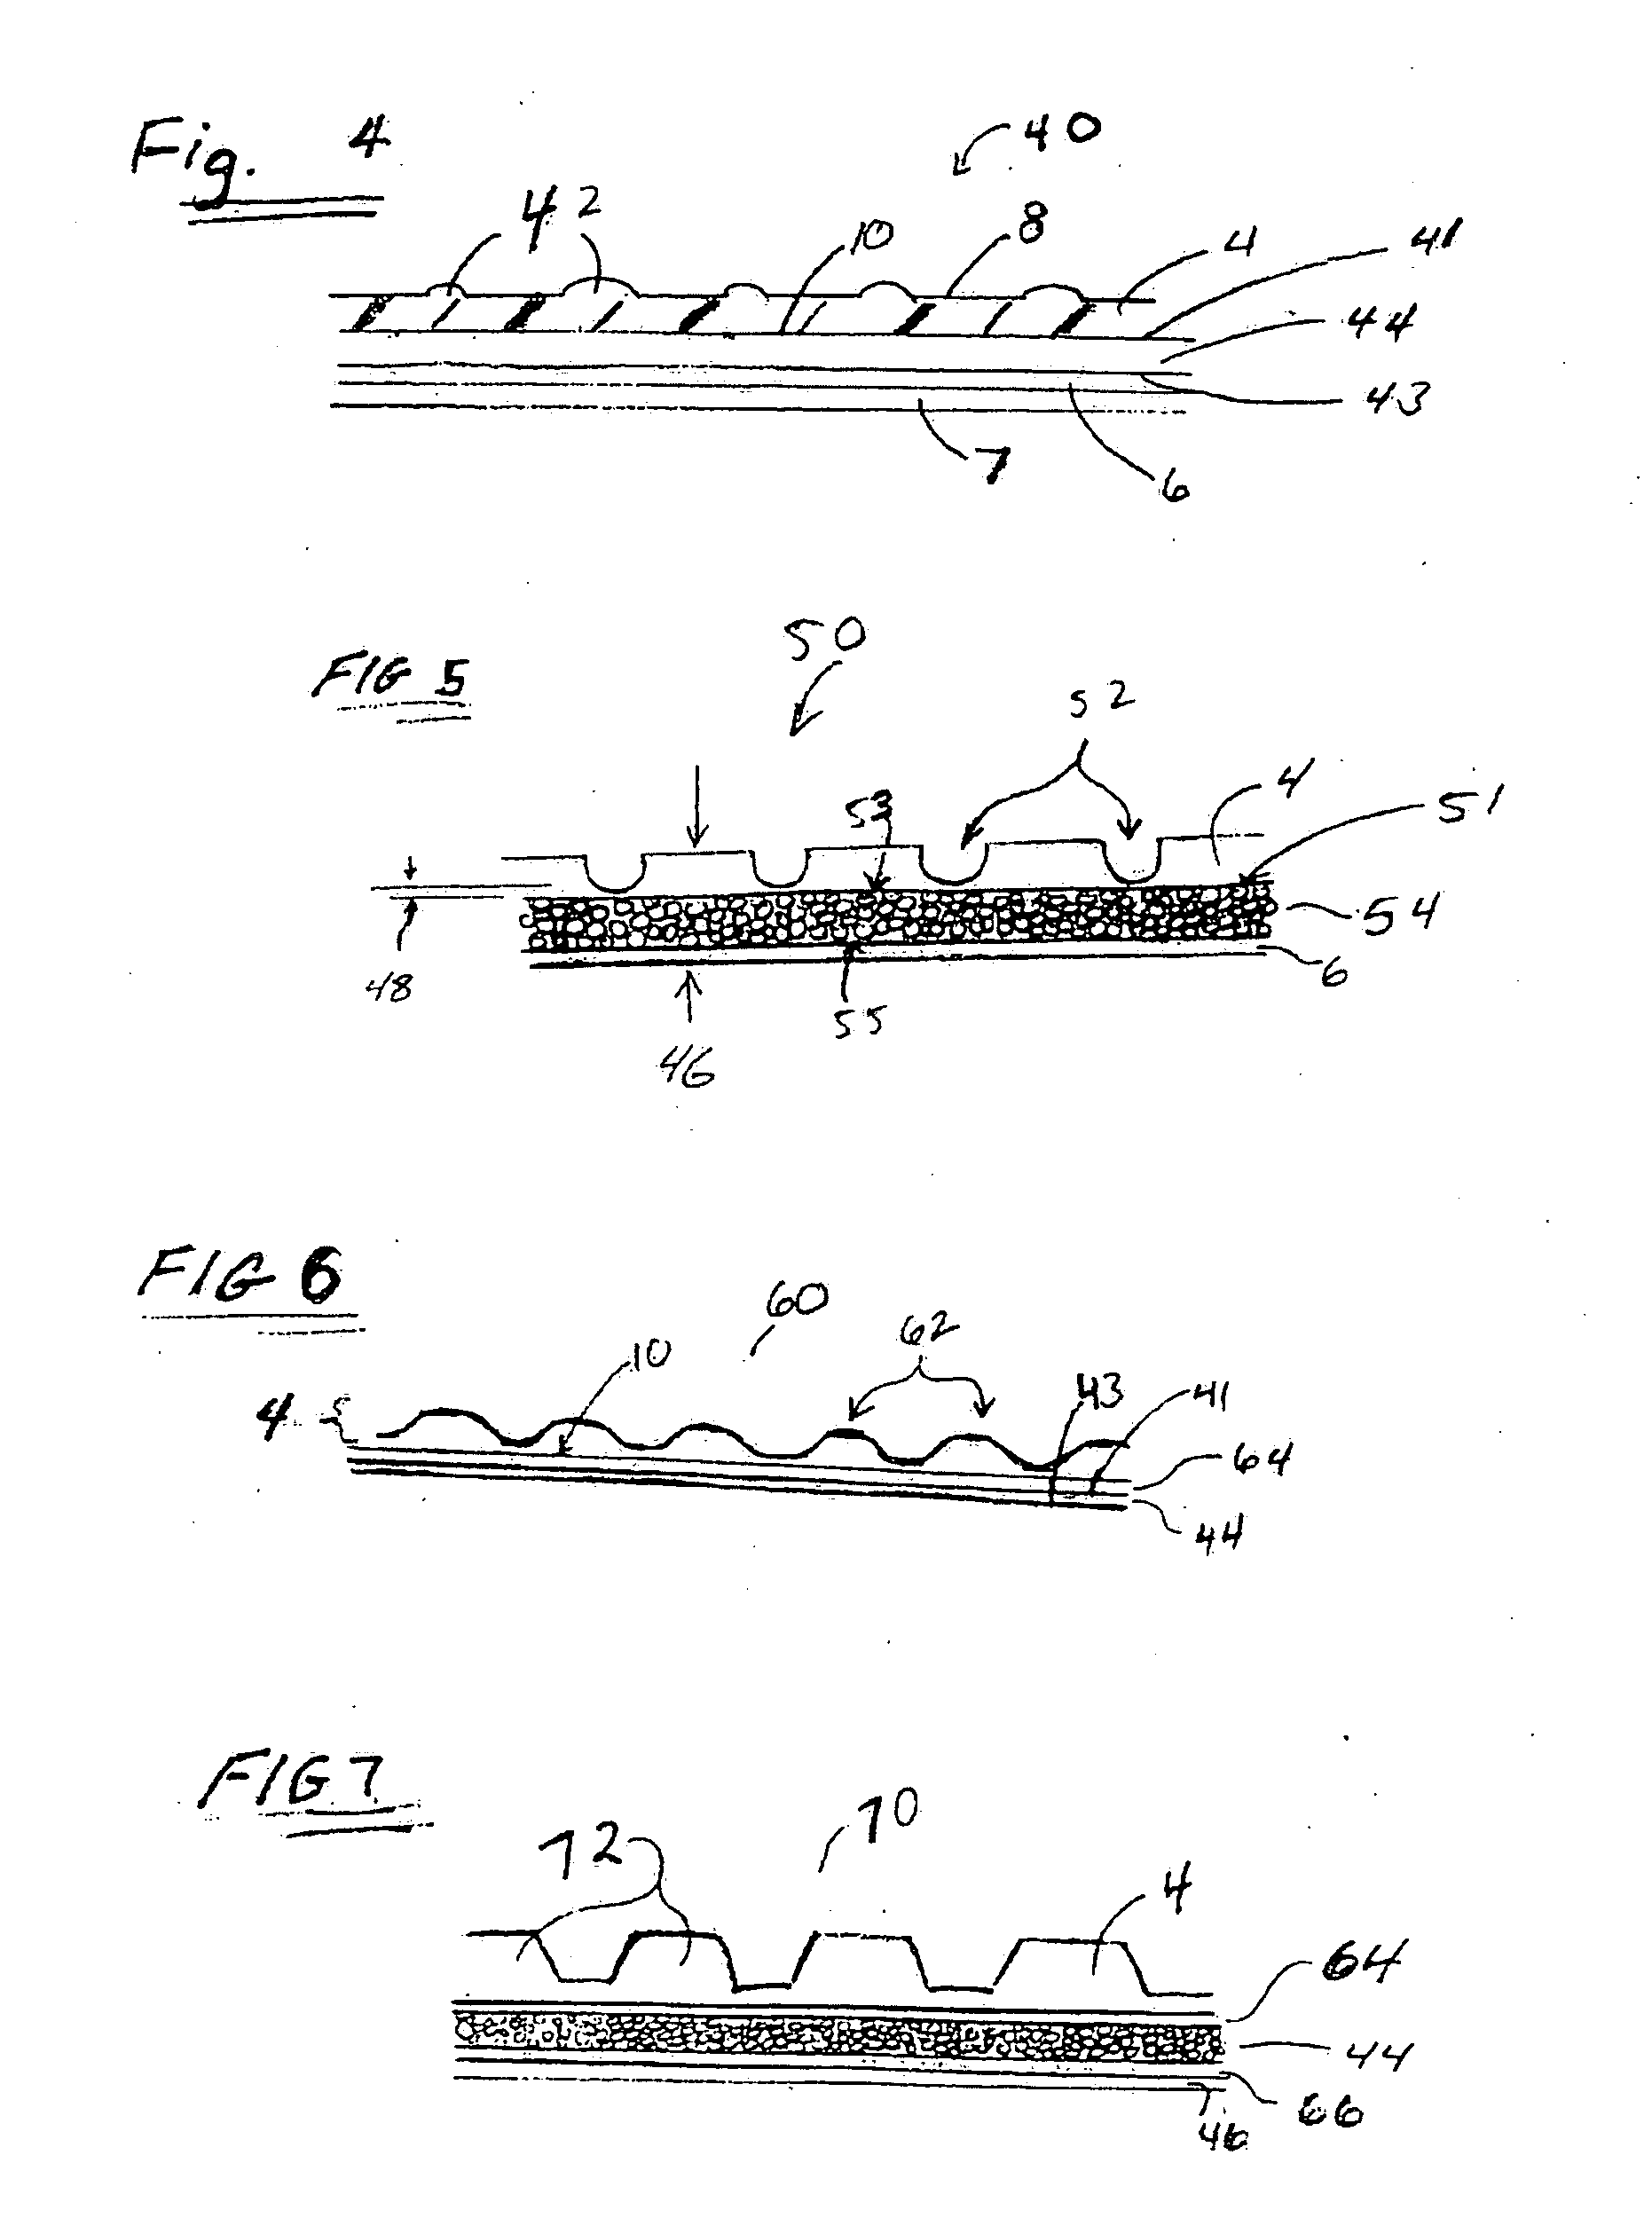 Silicone compositions, methods of manufacture, and articles formed therefrom